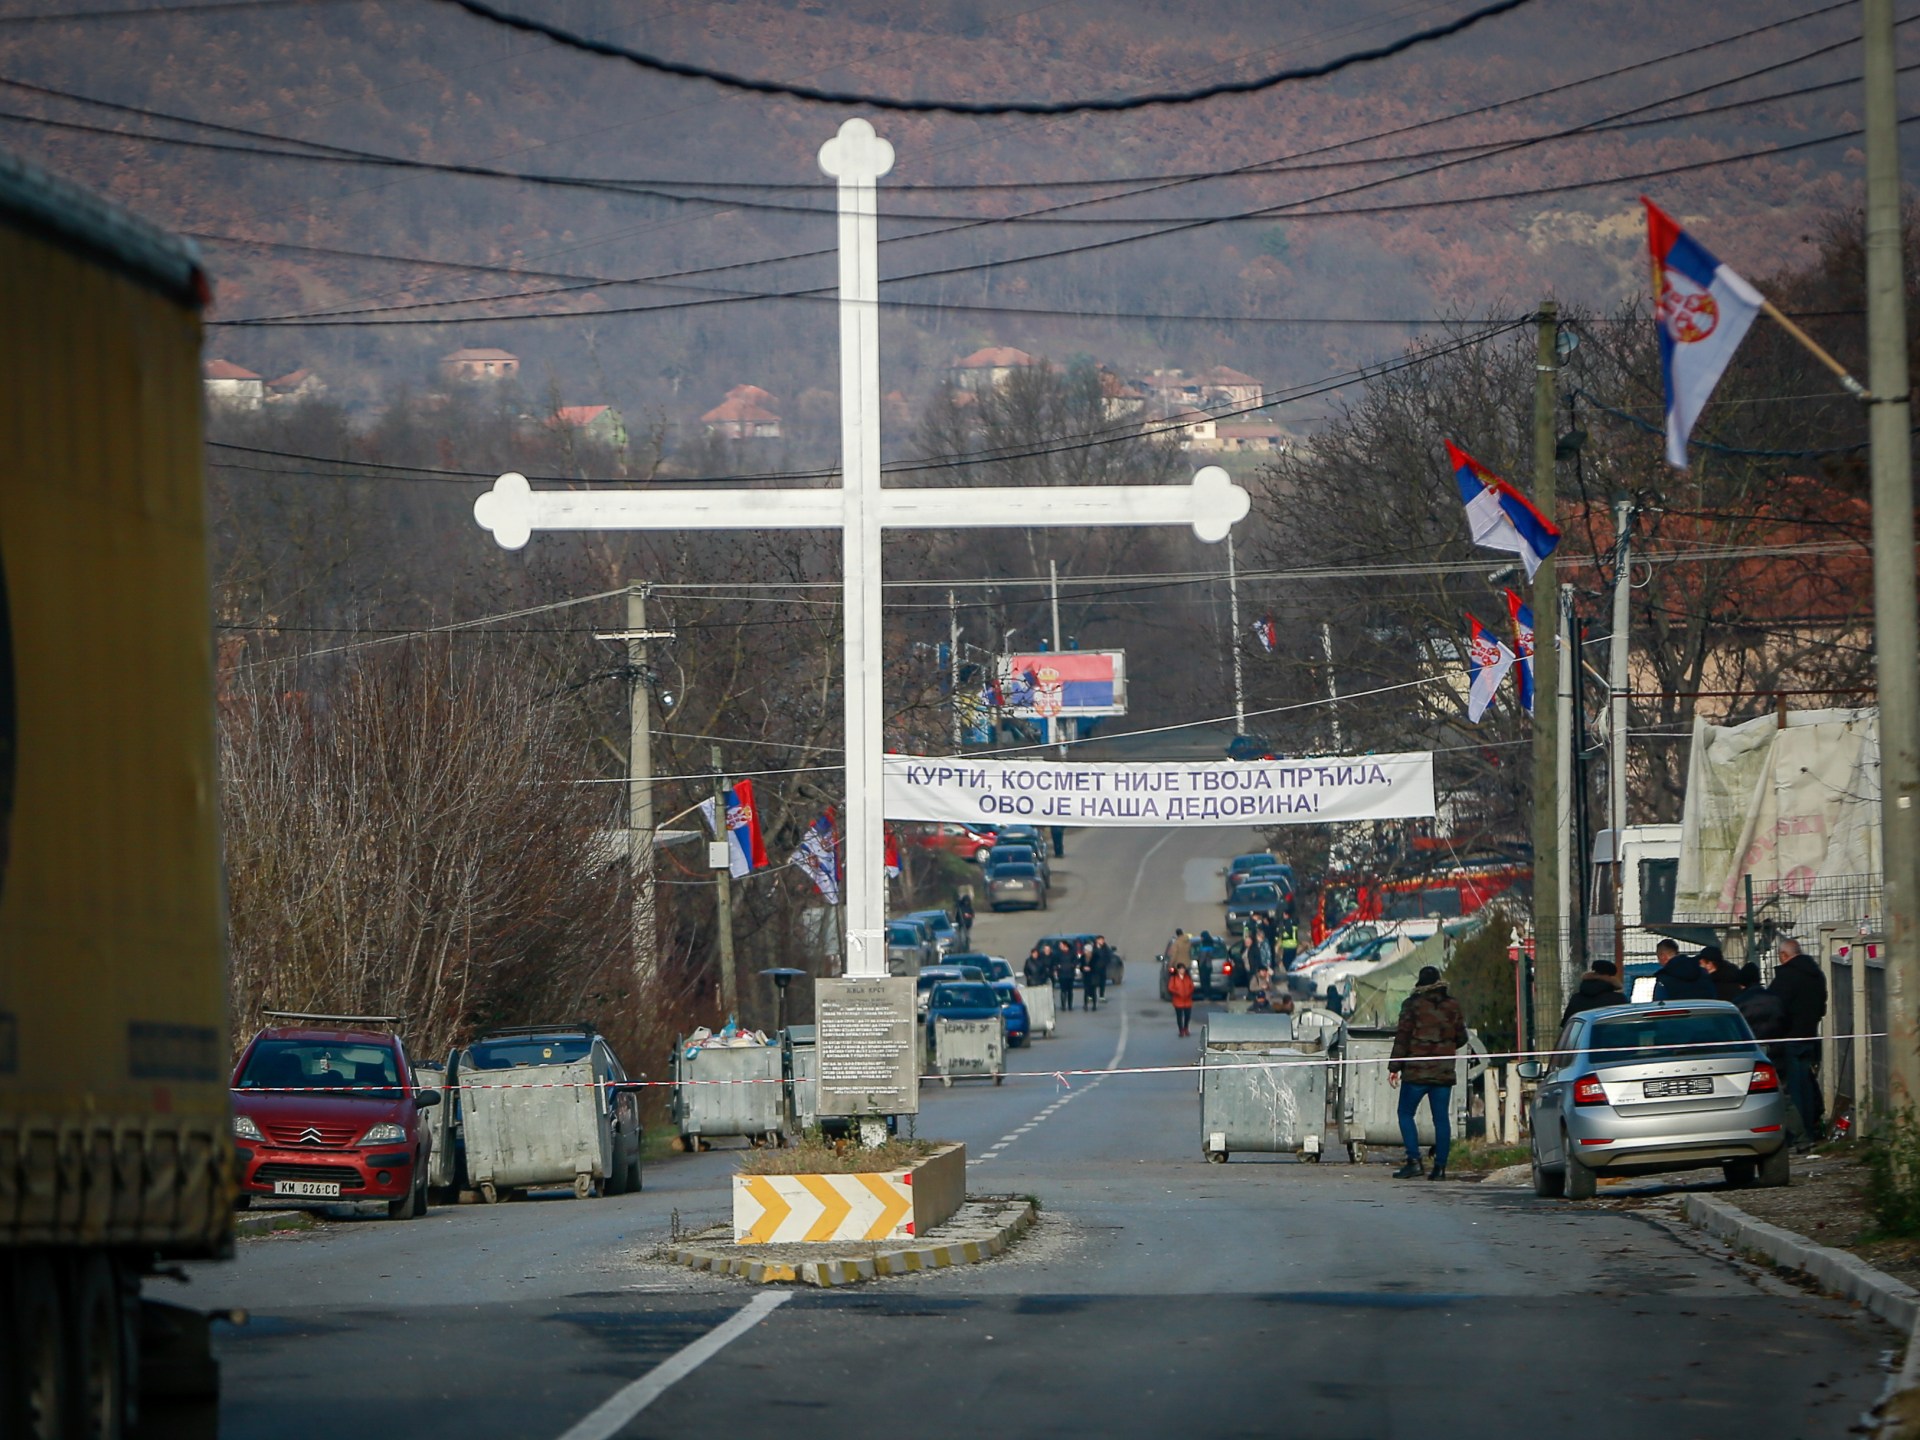 Protesting Serbs in northern Kosovo begin removing barricades |  Conflict news